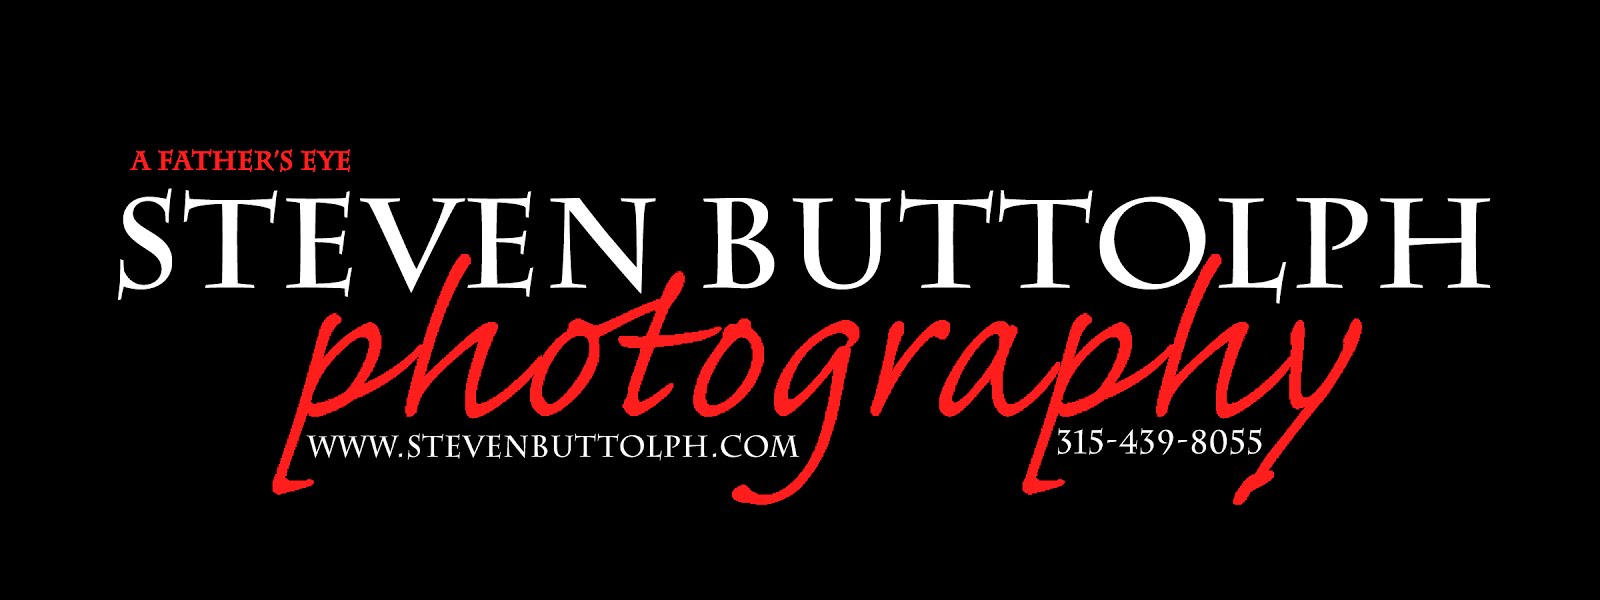 Steven Buttolph Photography